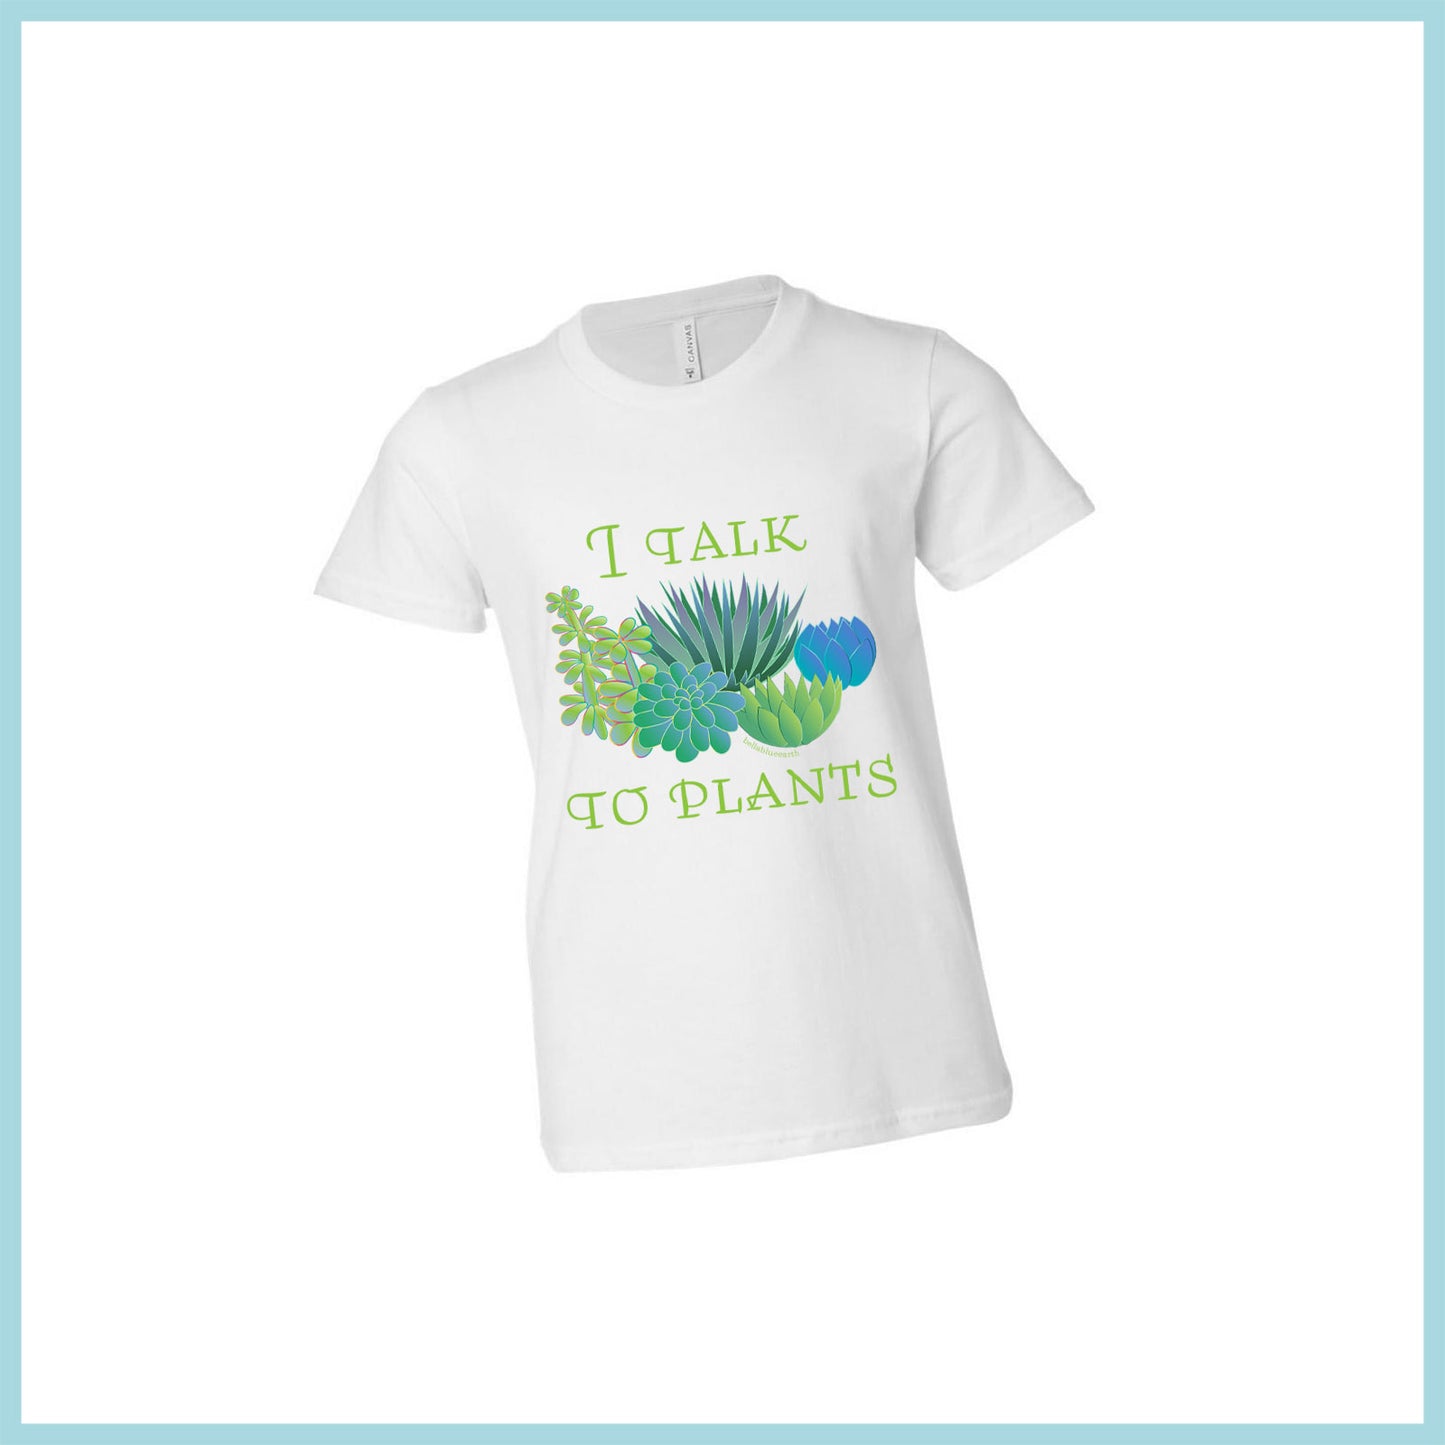 mockup of white tshirt with phrase "I Talk To Plants" and five simply drawn house plants